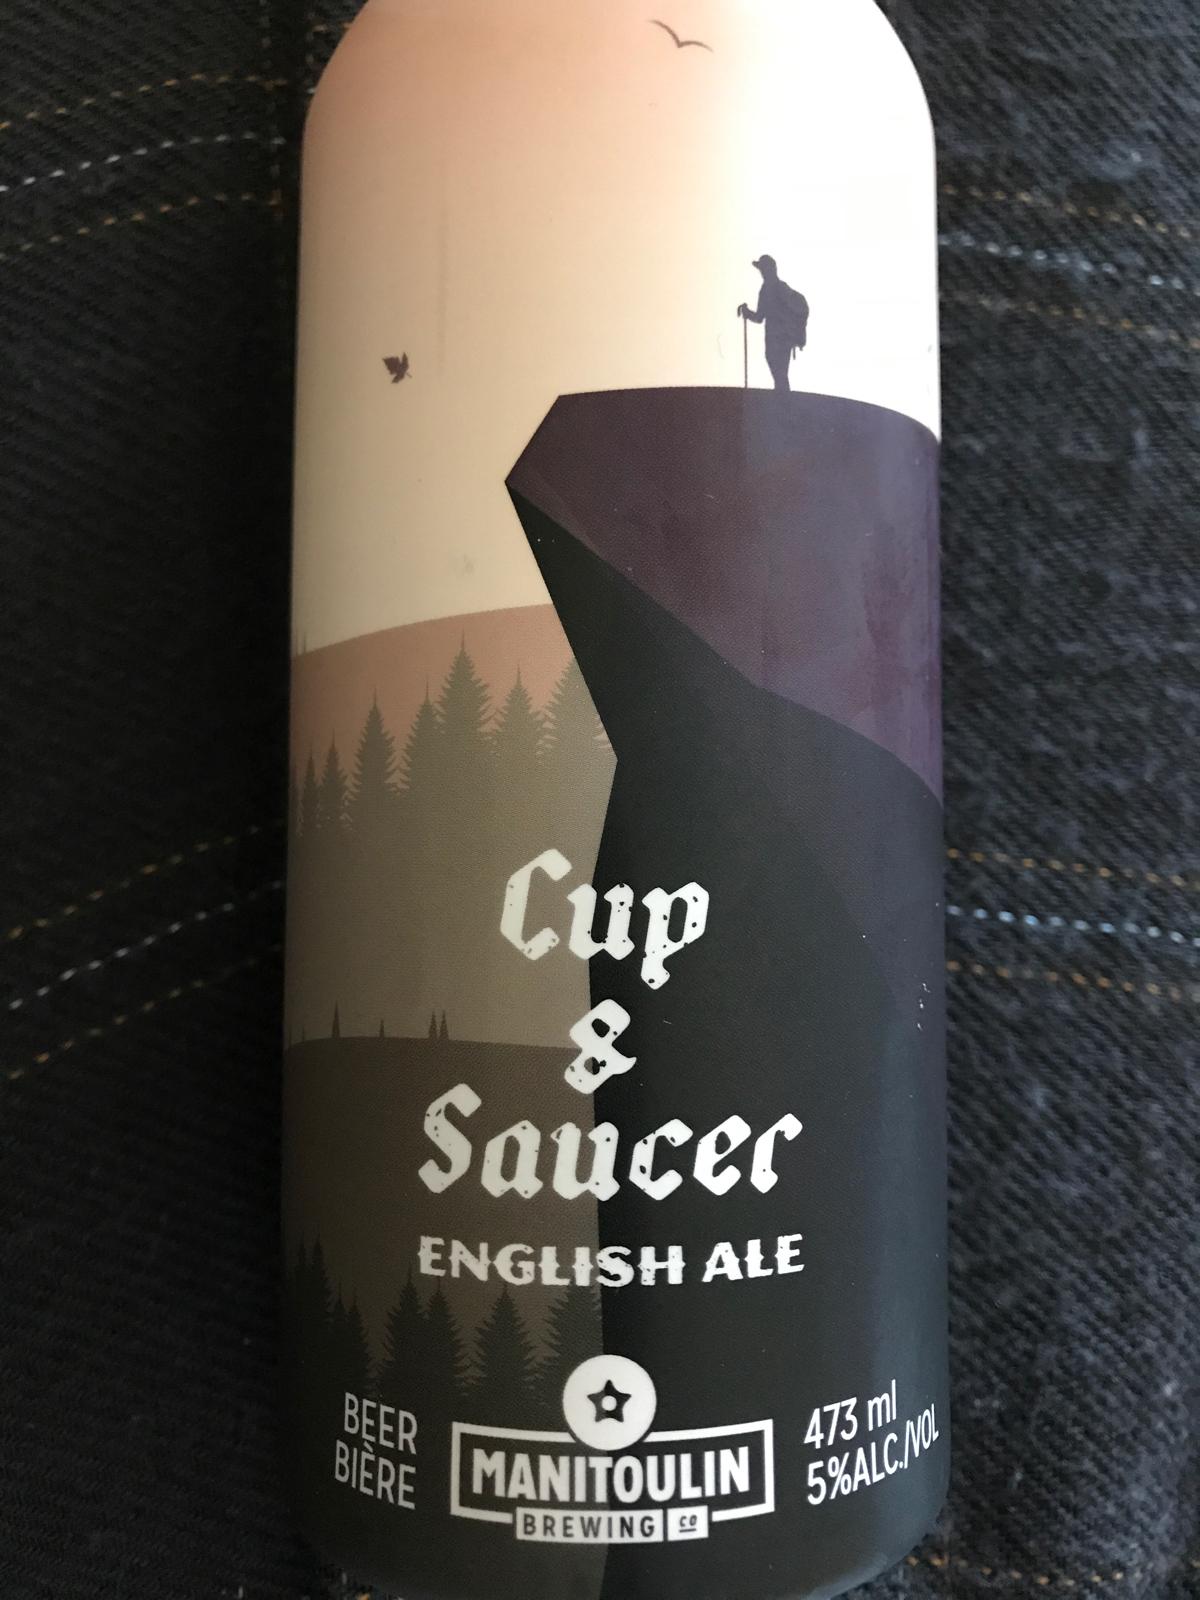 Cup & Saucer English Ale